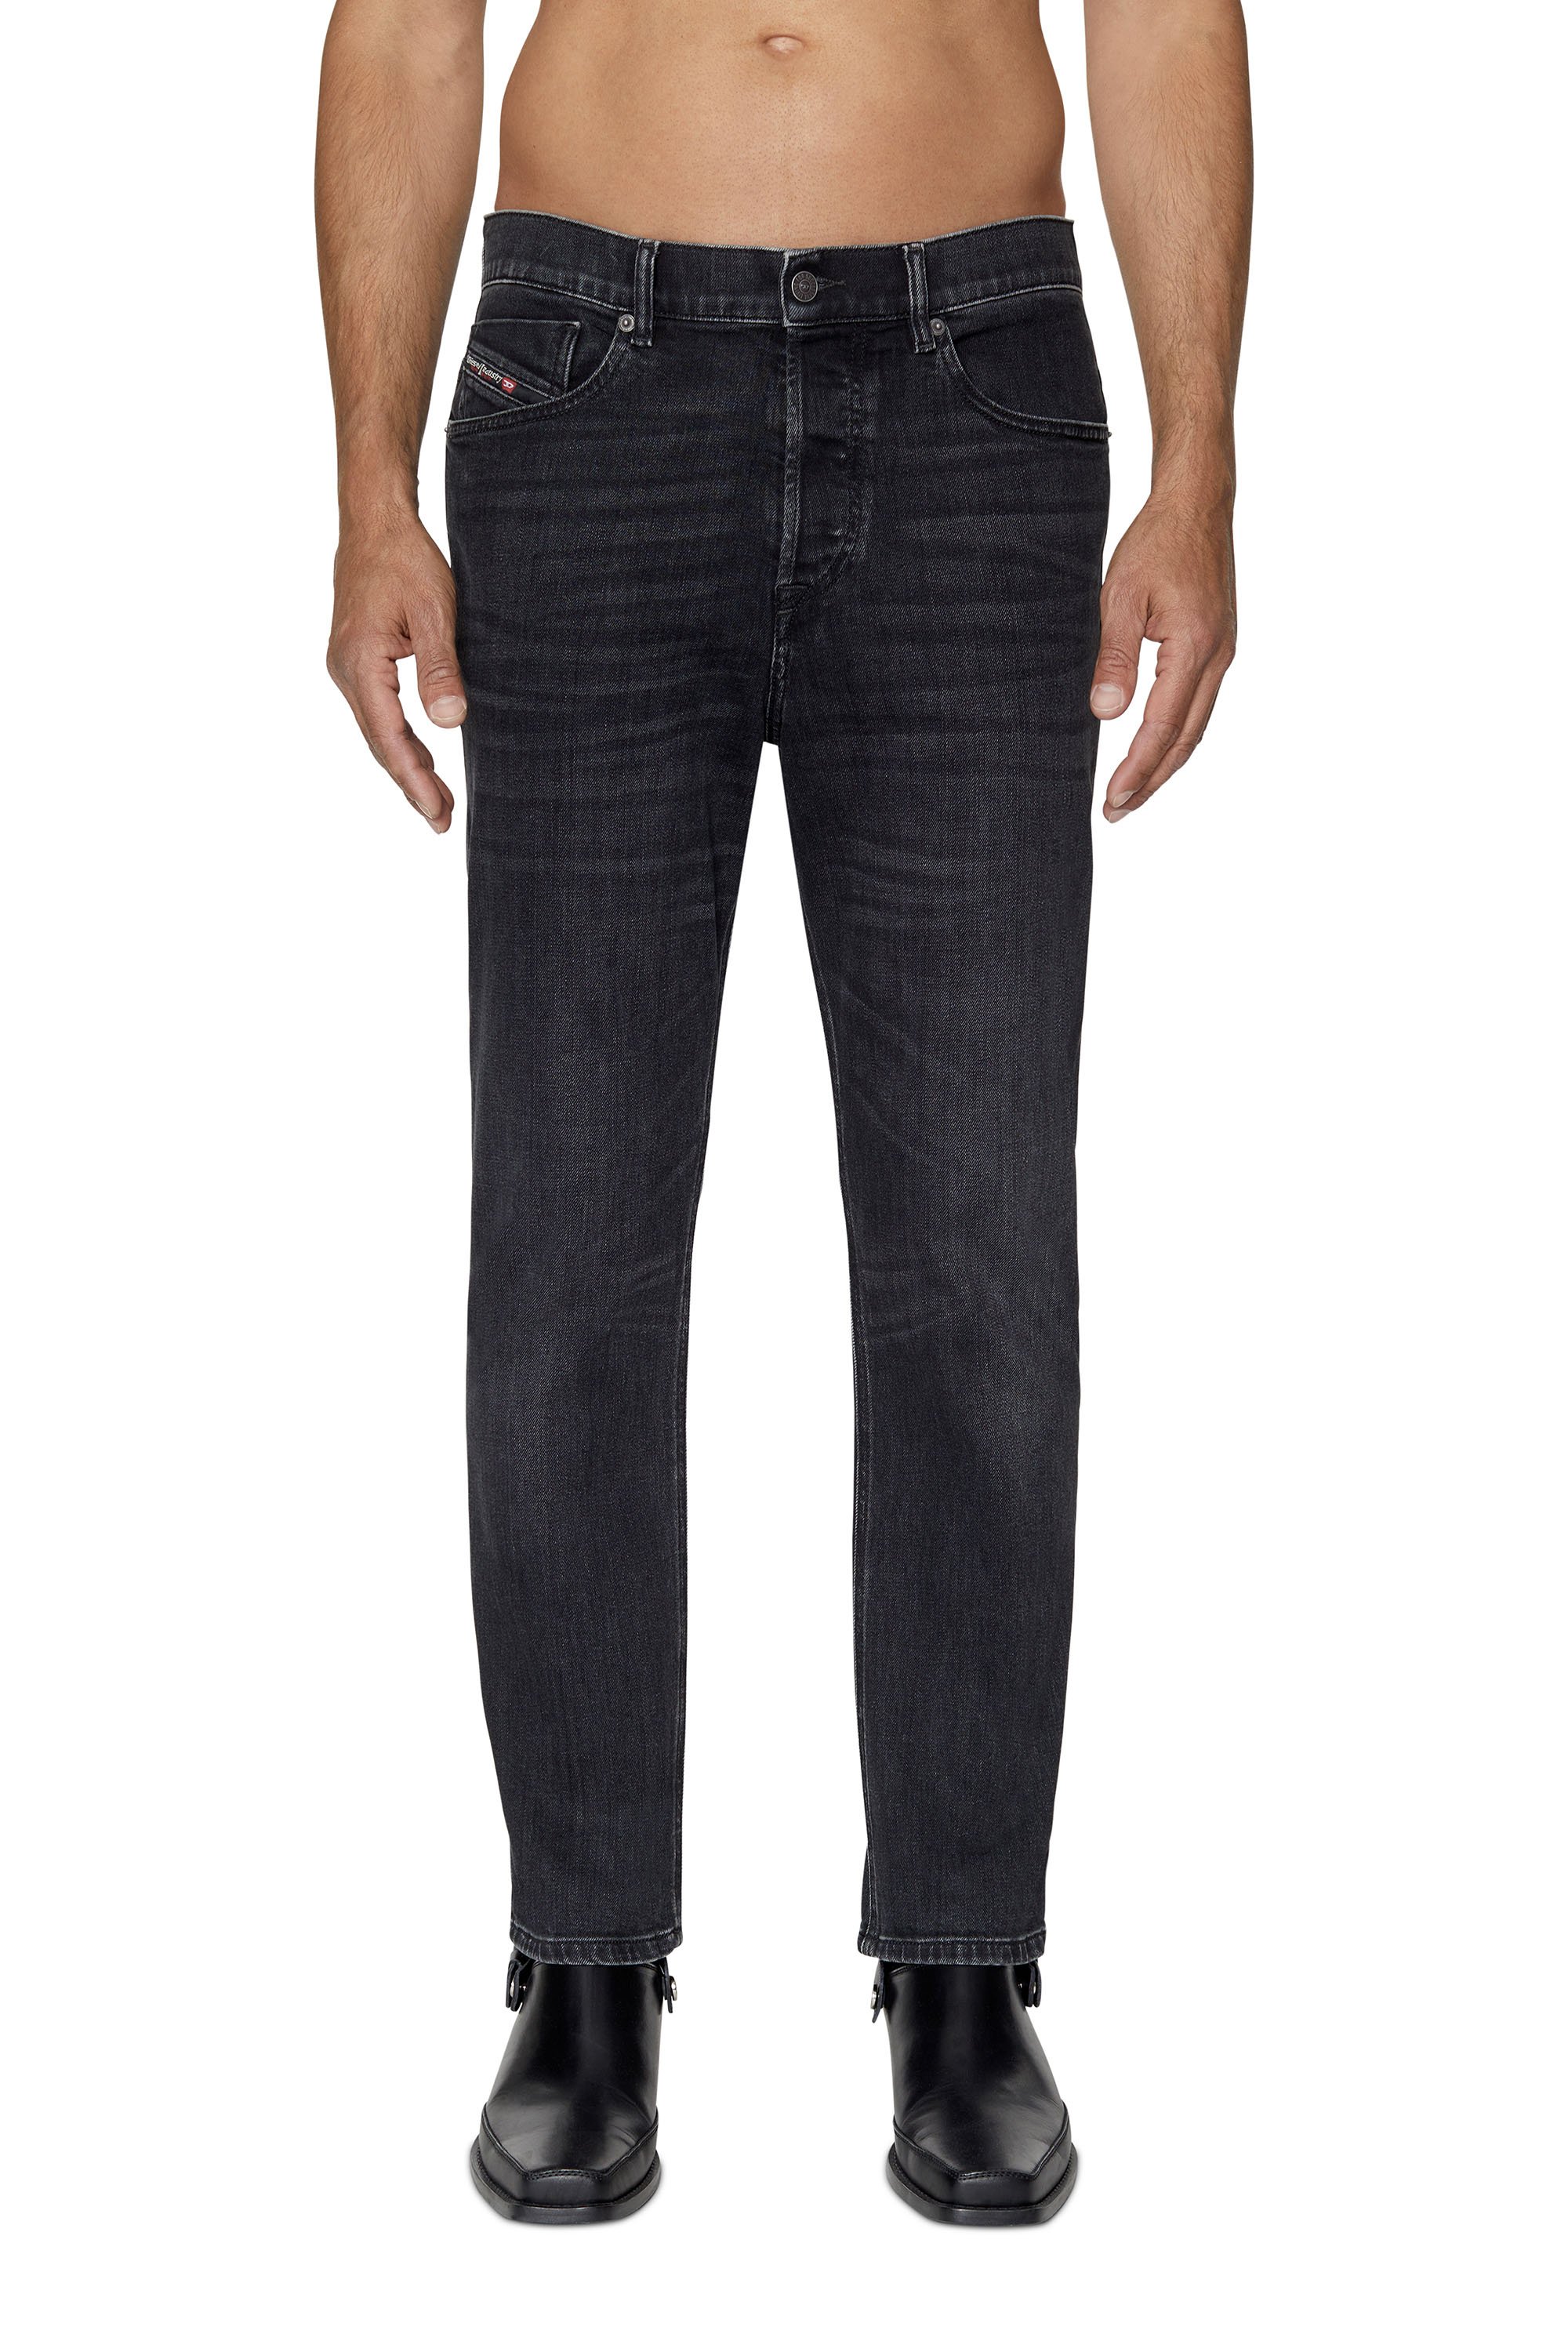 2005 D-FINING 09B83 Tapered Jeans, ブラック/ダークグレー - Jeans